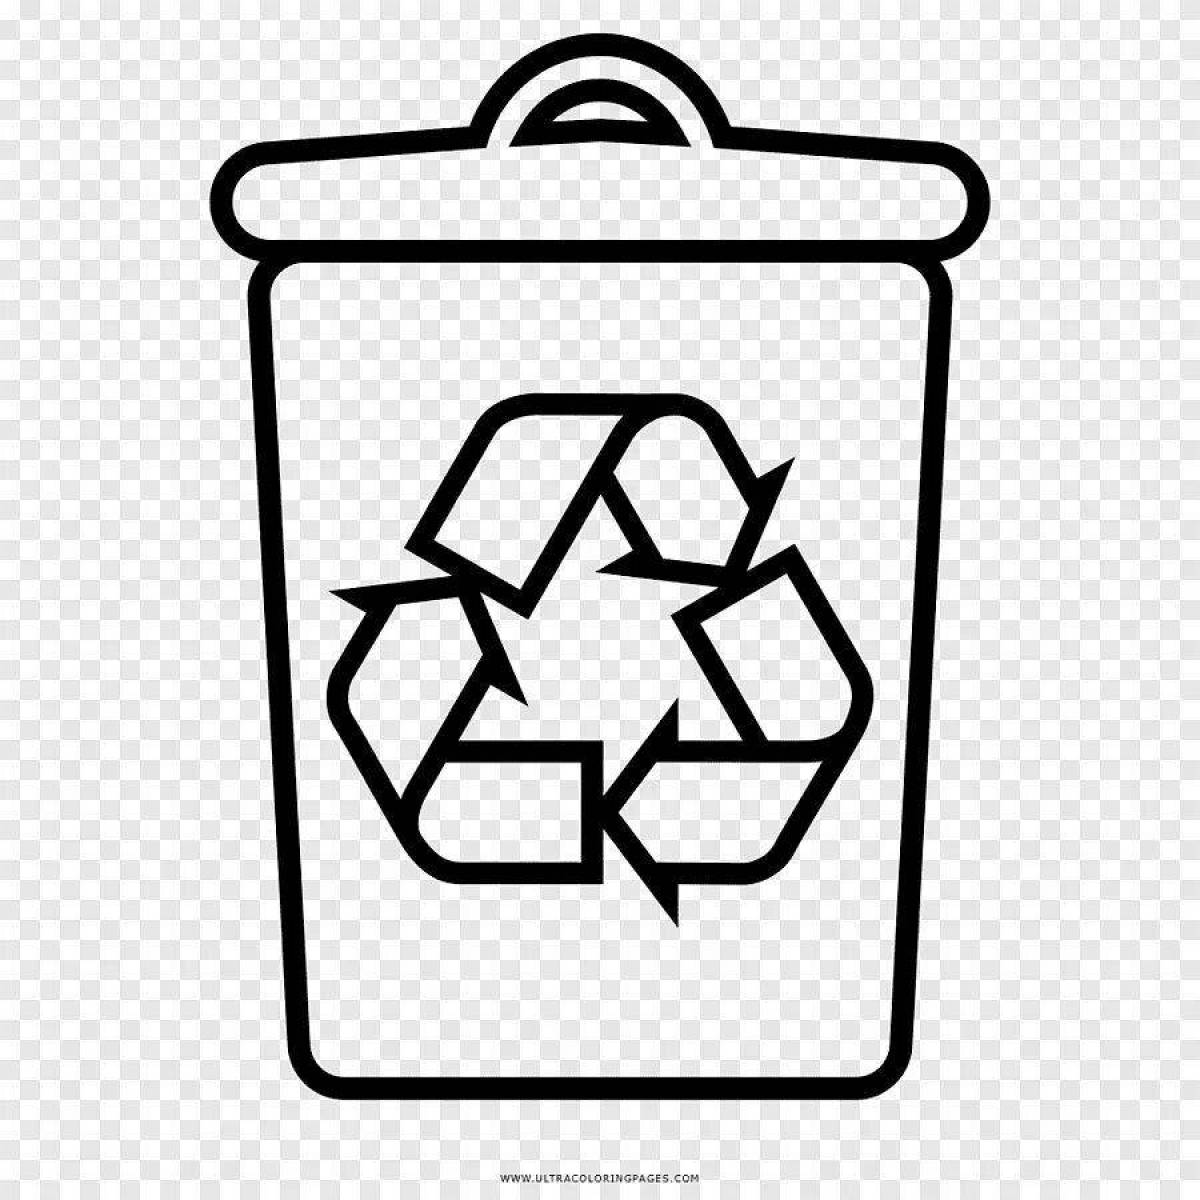 Animated trash can coloring page